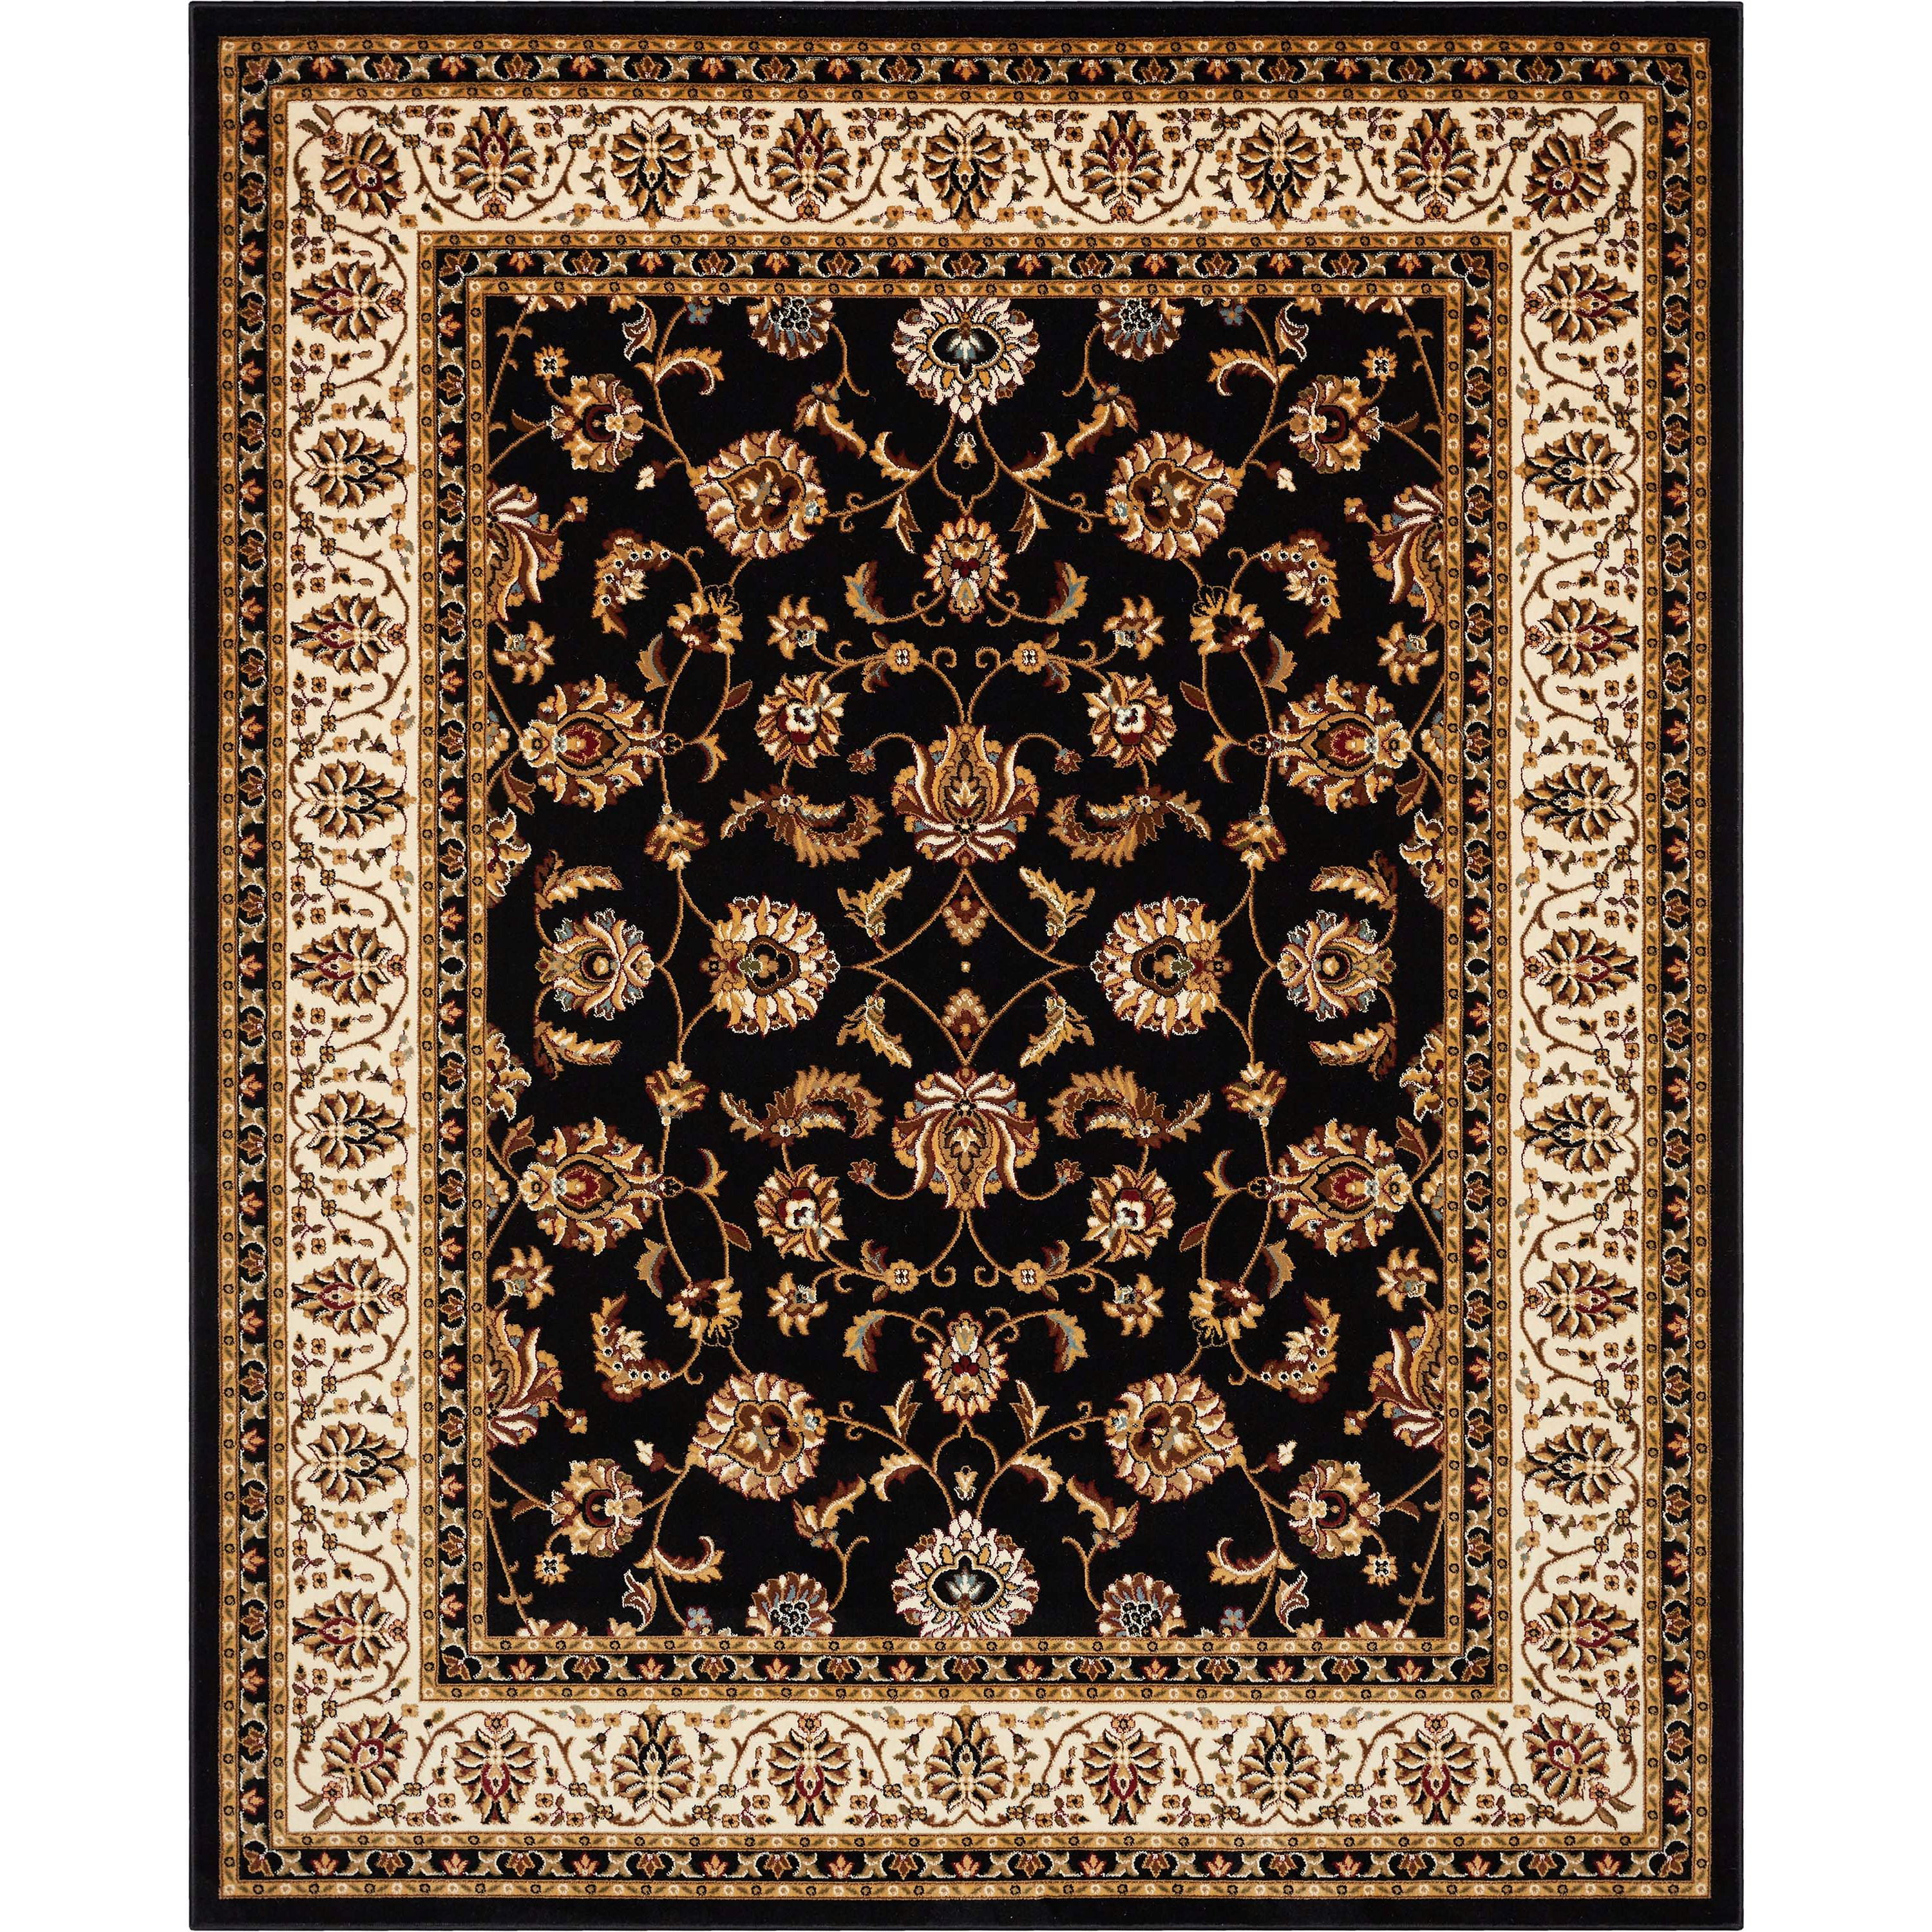 Noble Sarouk Persian Floral Oriental Formal Traditional Area Rug 